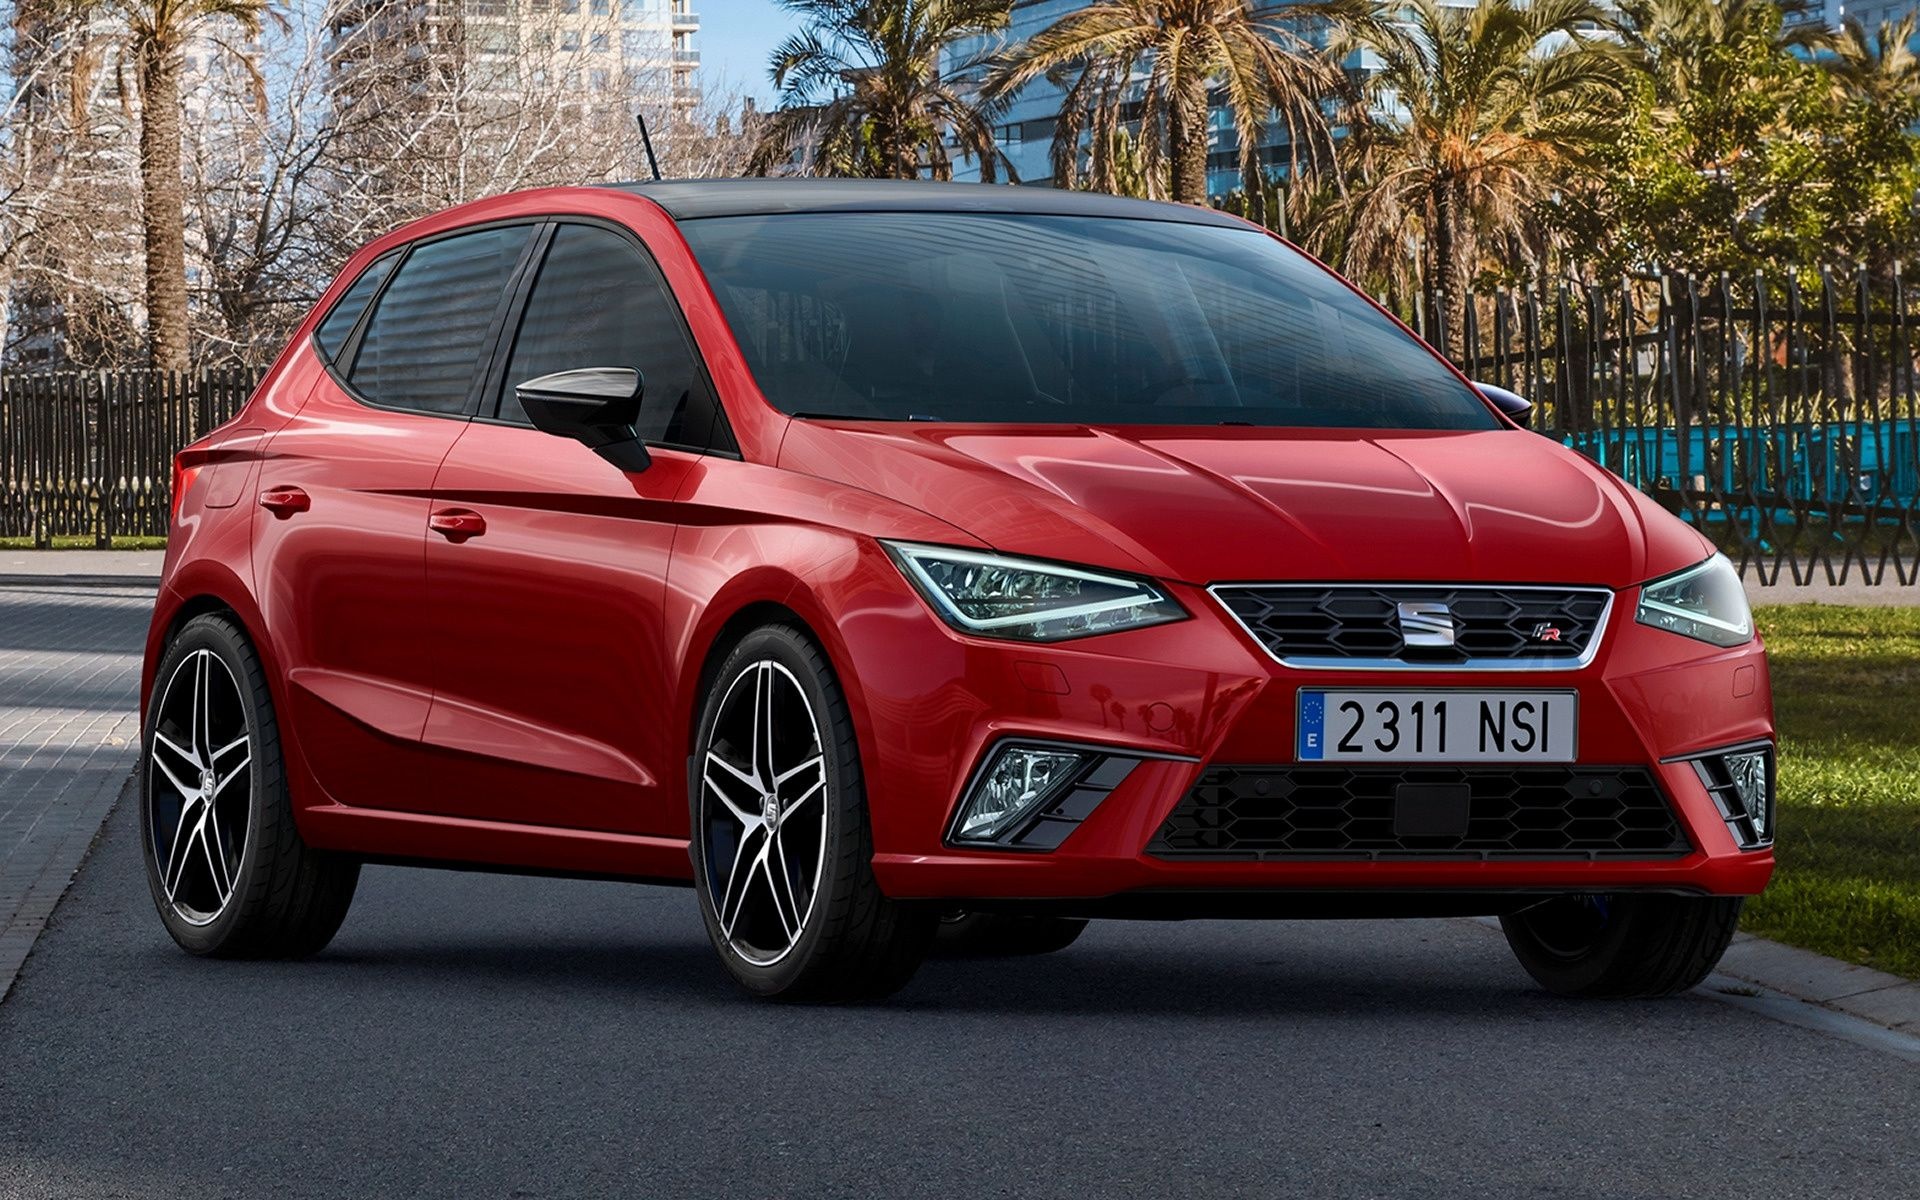 Seat Ibiza, Auto lover's delight, Top-notch wallpapers, Amazing backgrounds, 1920x1200 HD Desktop